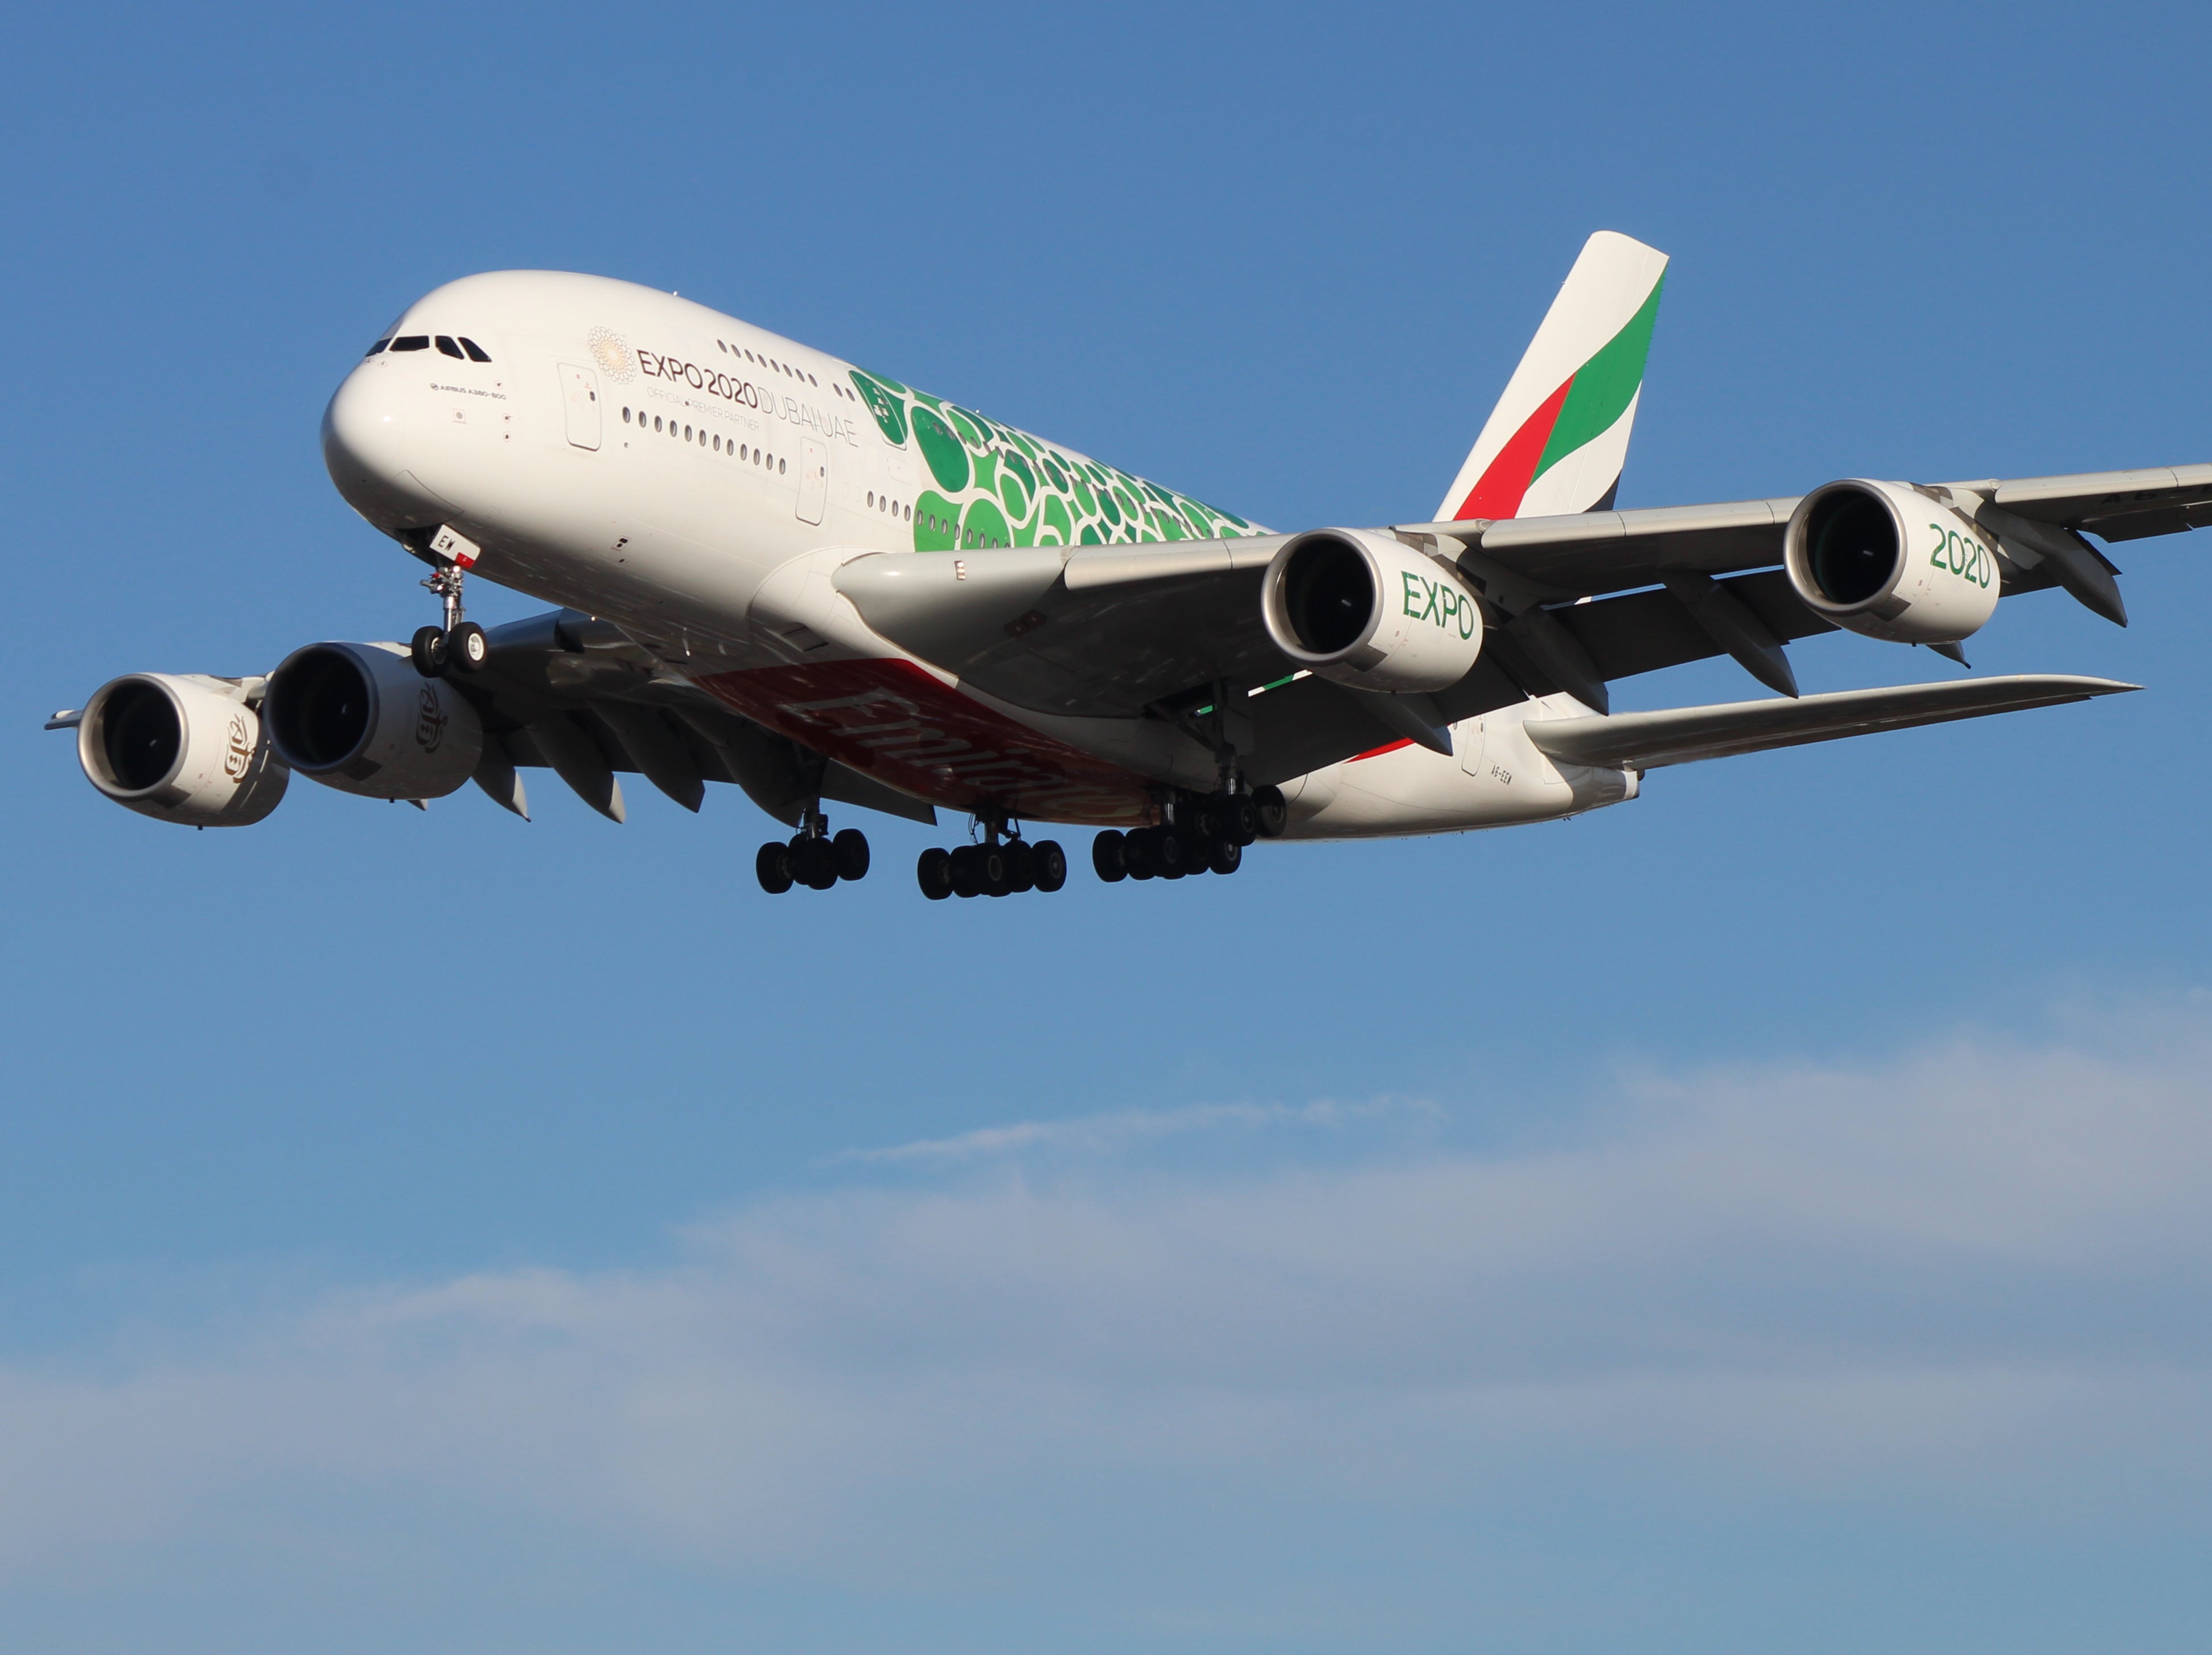 World beater: Airbus A380 belonging to Emirates